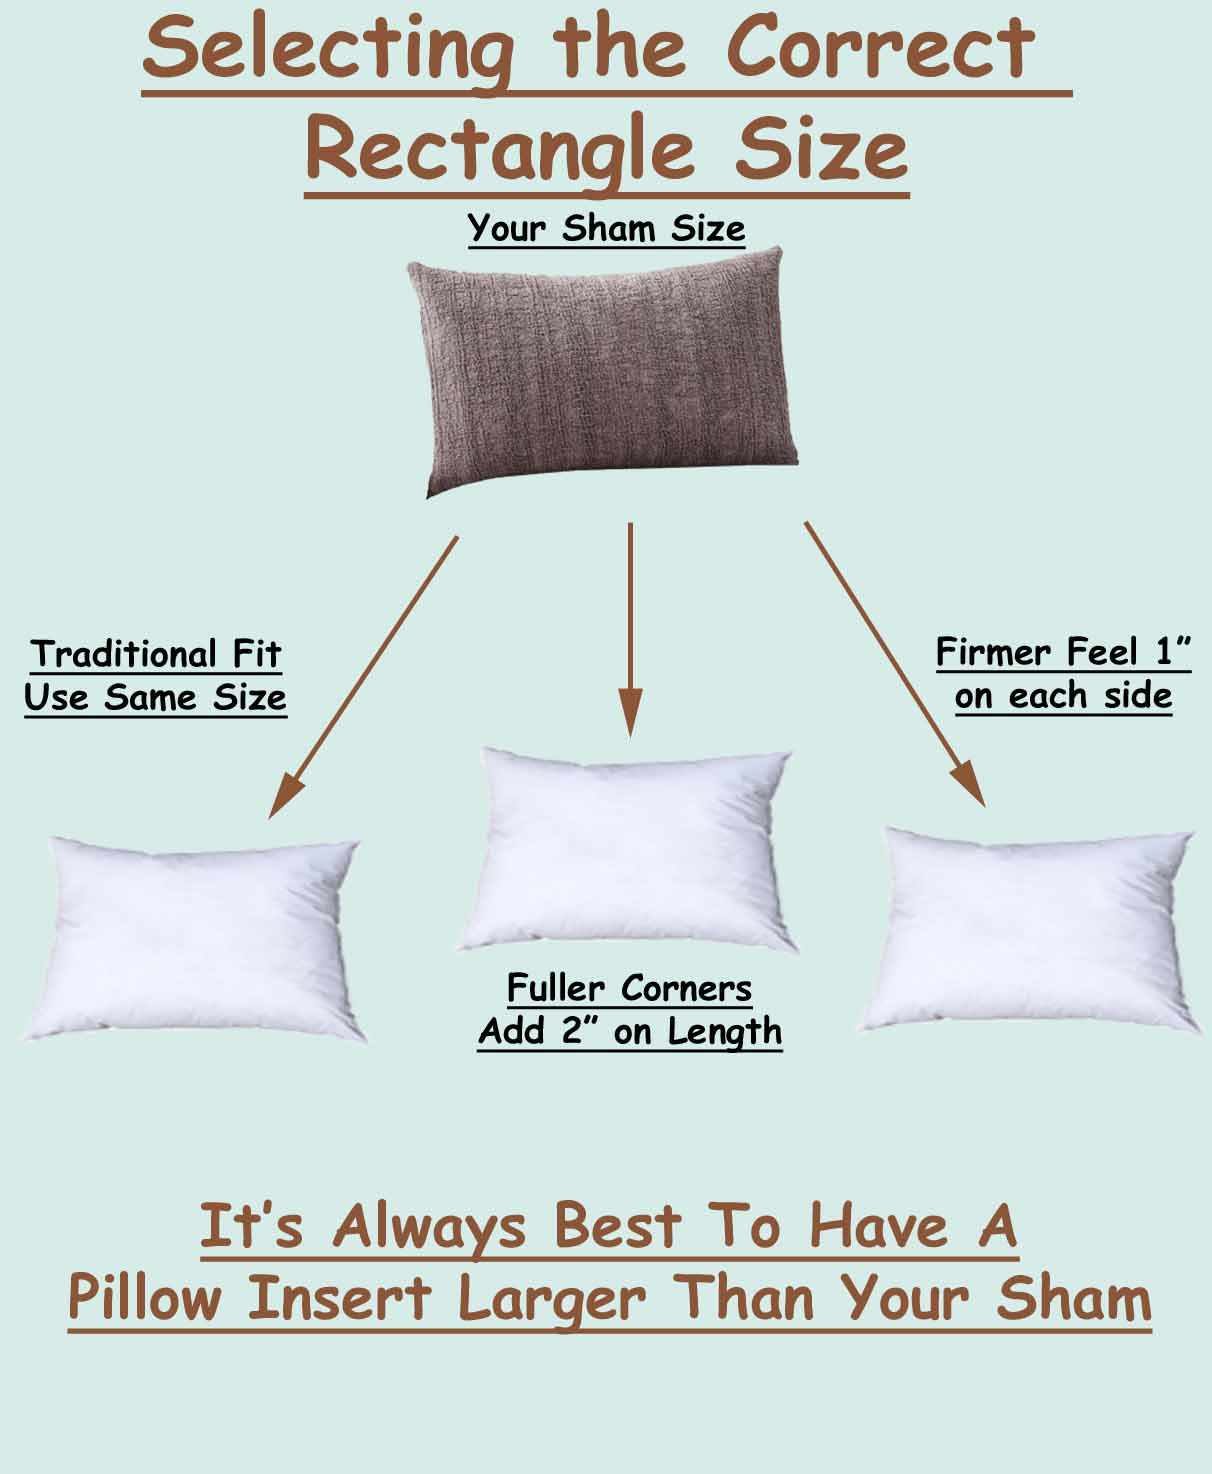 How to select the correct size rectangle pillow insert